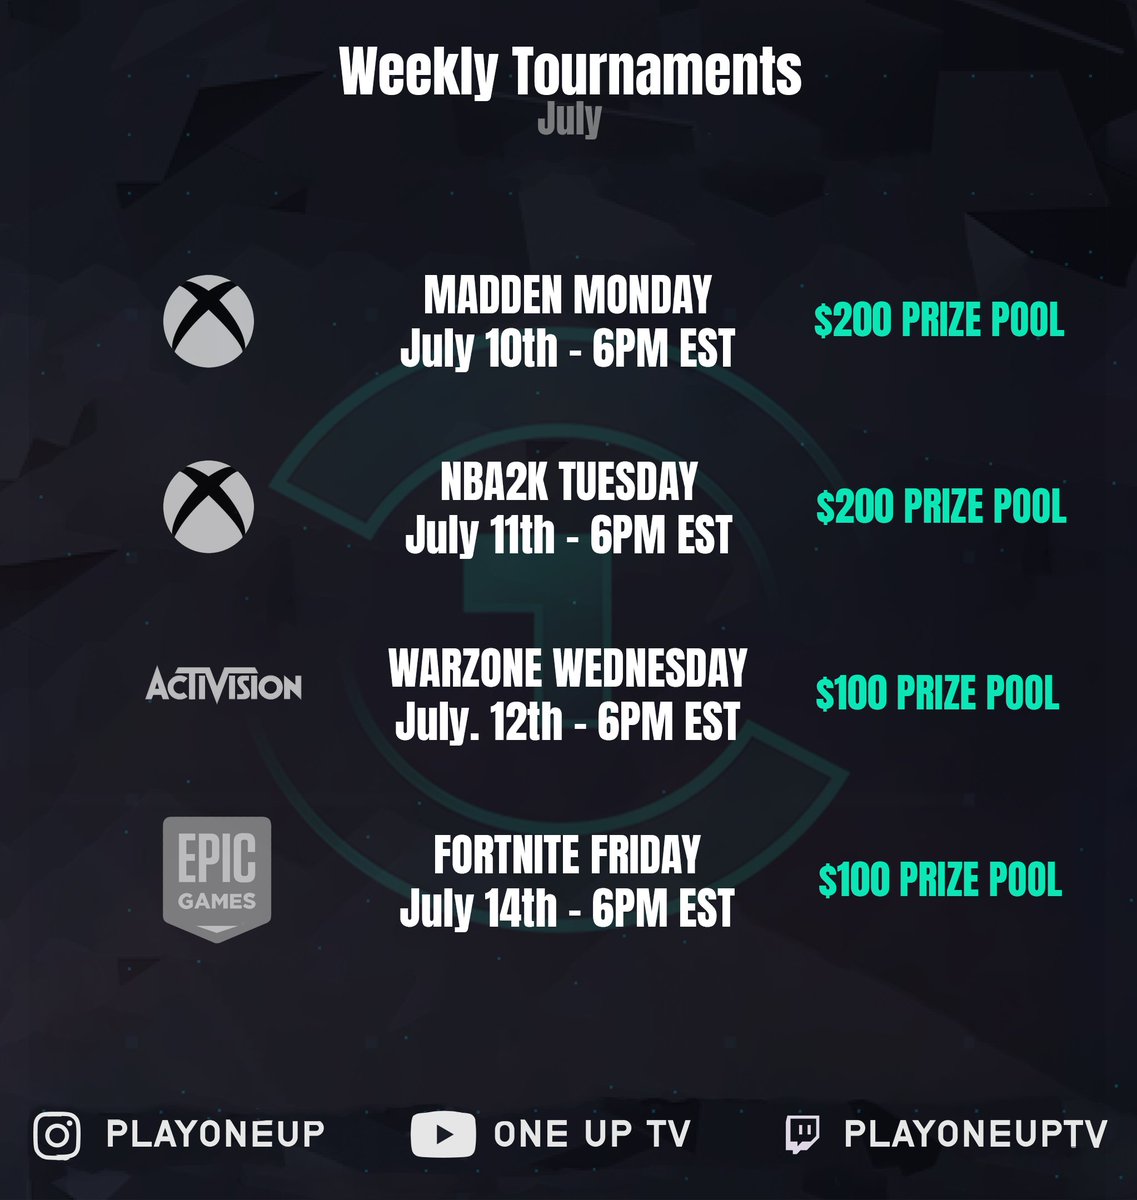 Join now for this week's hottest E-Sports Tournaments on Play One Up! #NBA2K #Madden23 #ItPaysToPlay

Sign-up here ➡️ playoneup.com